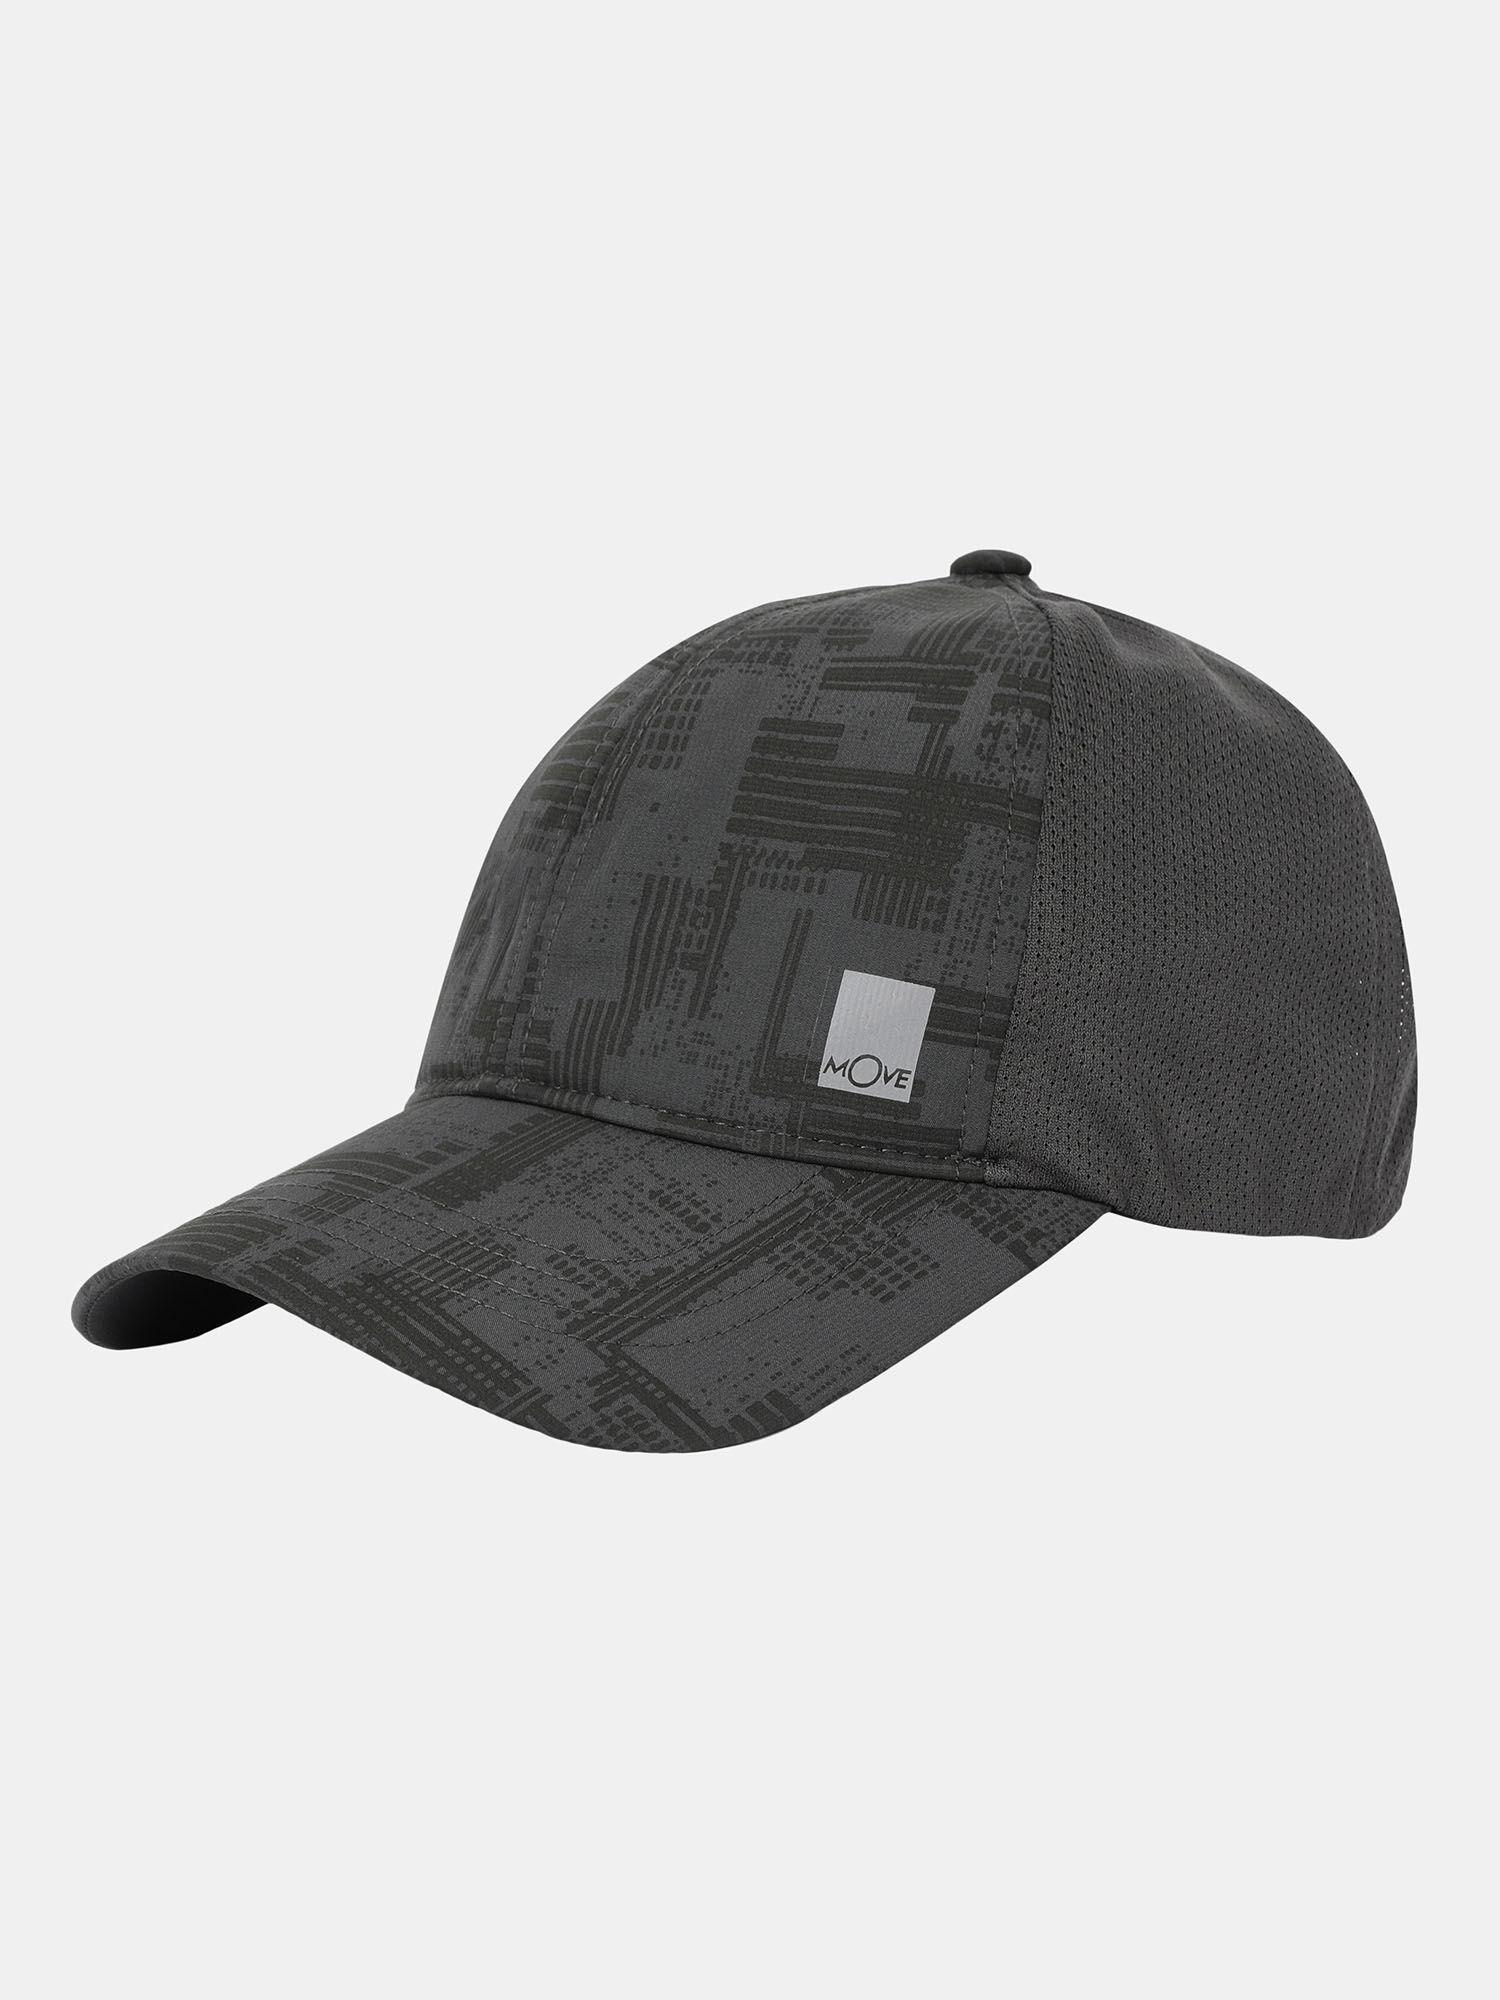 cp23-polyester-printed-cap-with-adjustable-back-closure-and-stay-dry-graphite